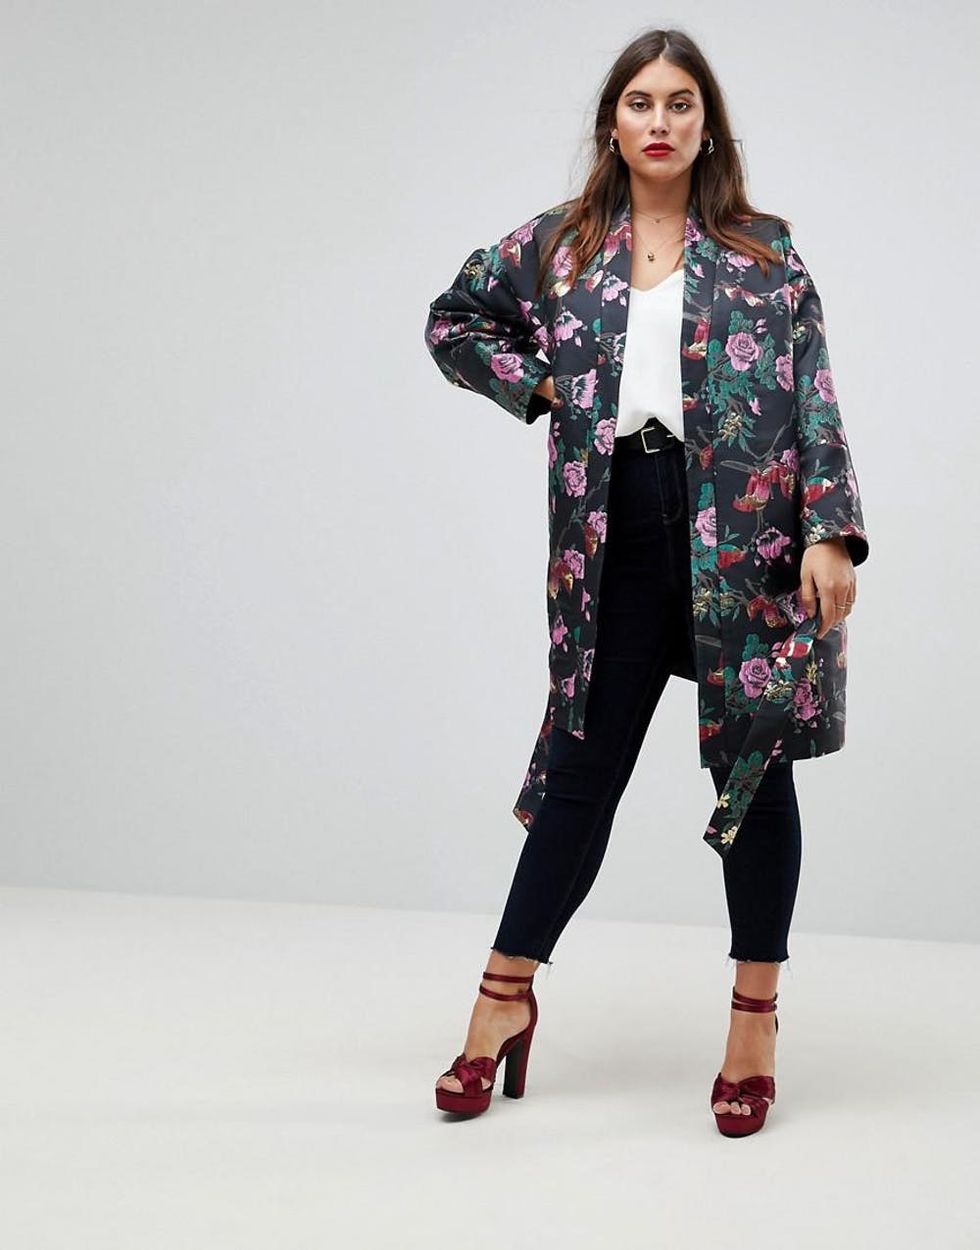 14 Fashion Must-Haves to Usher Your Work Wardrobe into Spring - Brit + Co